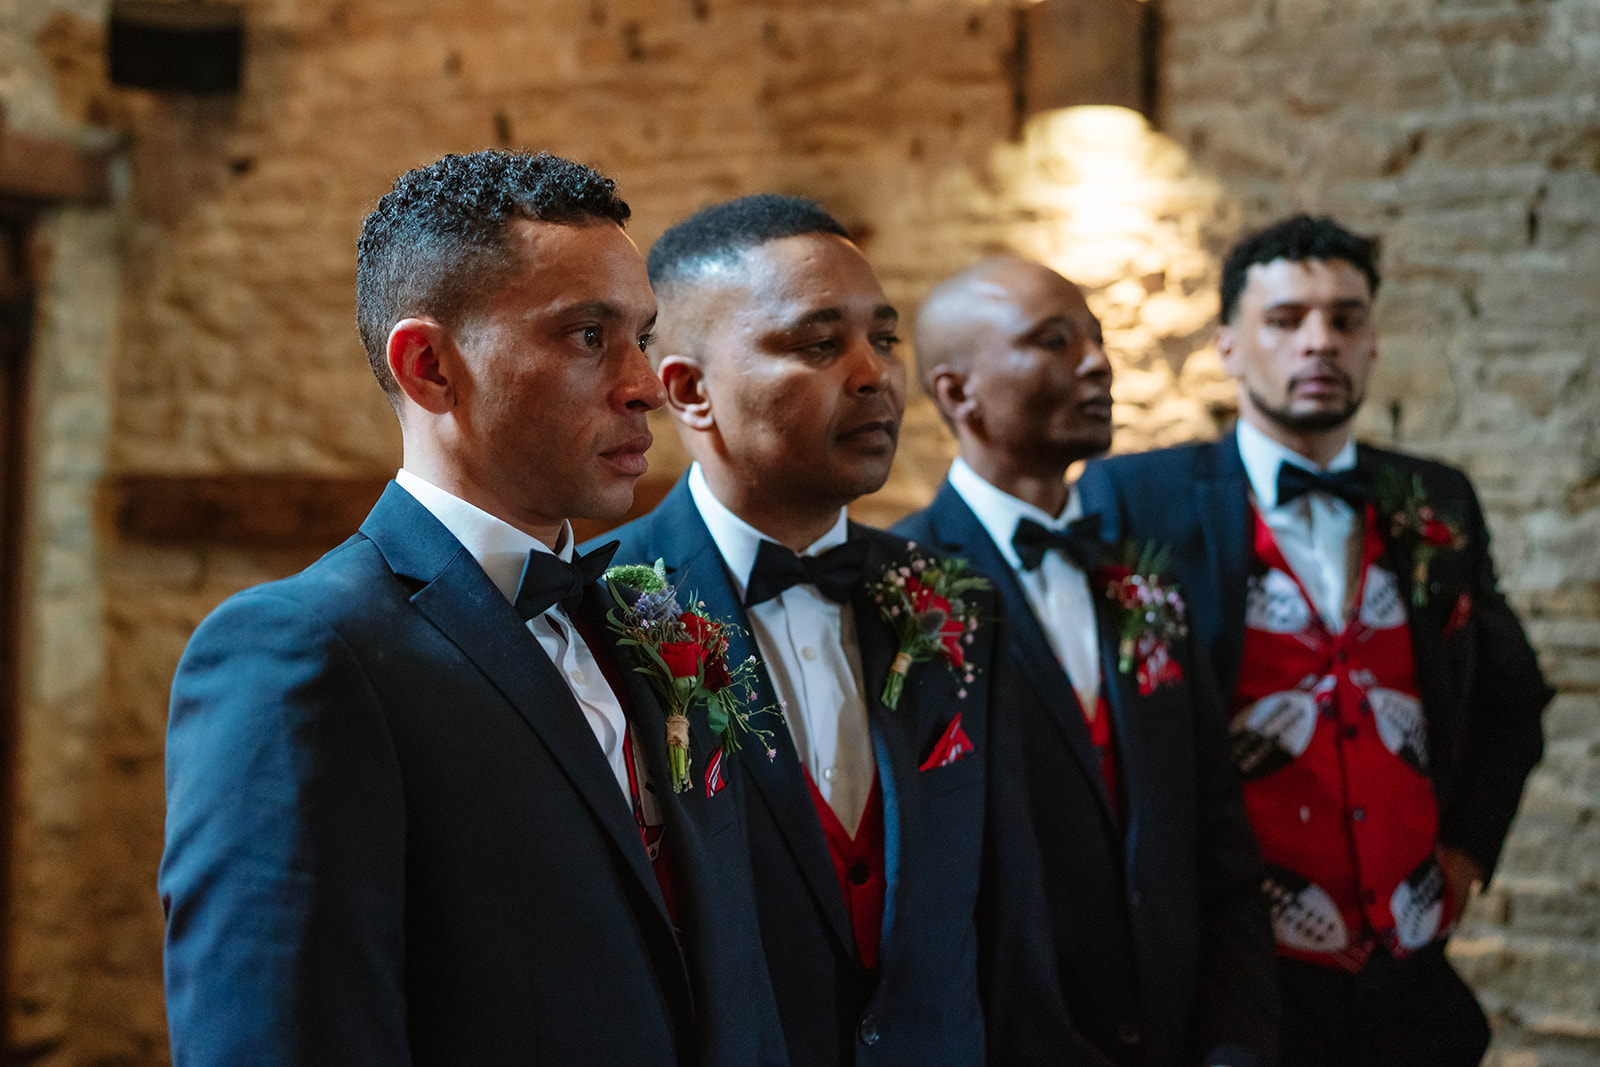 Groom and Groomsmen waiting for bridal entrance